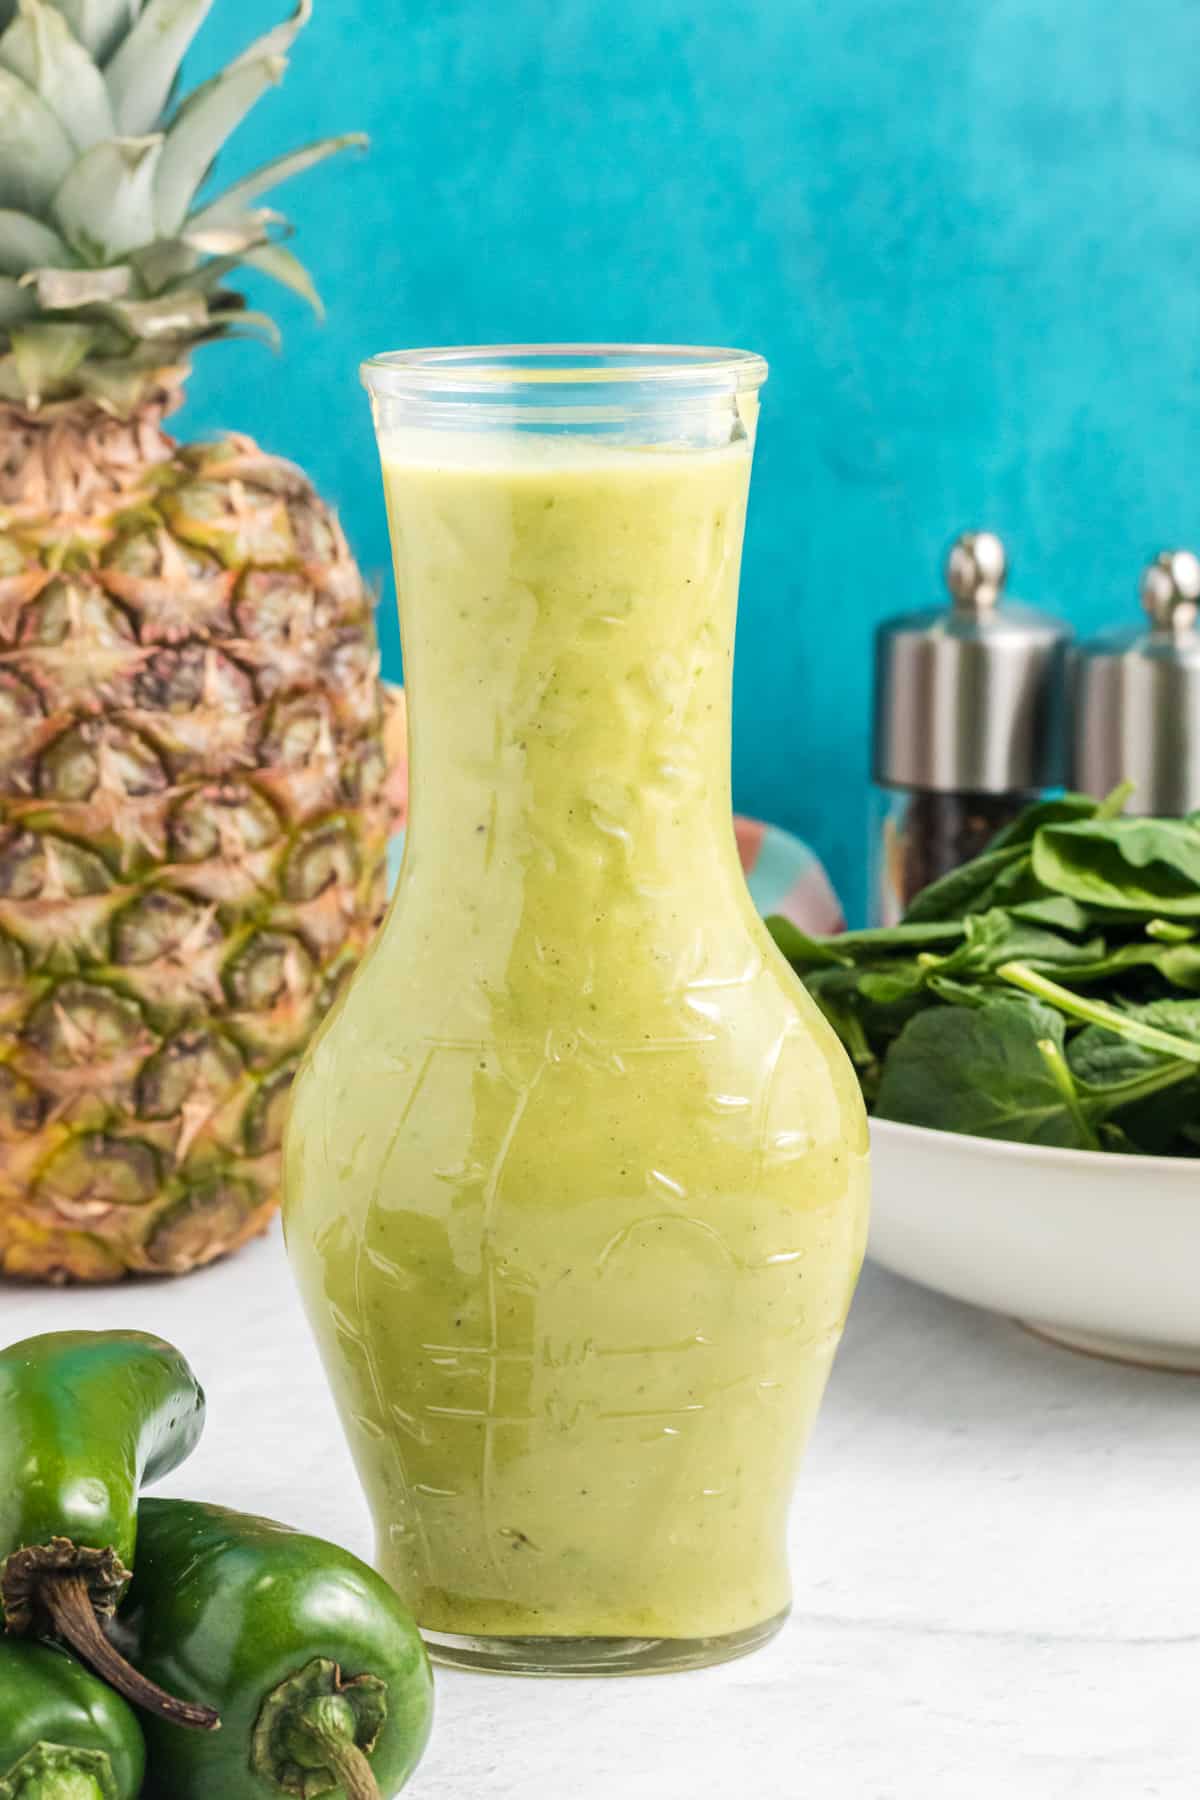 A large glass container is filled with green salad dressing.